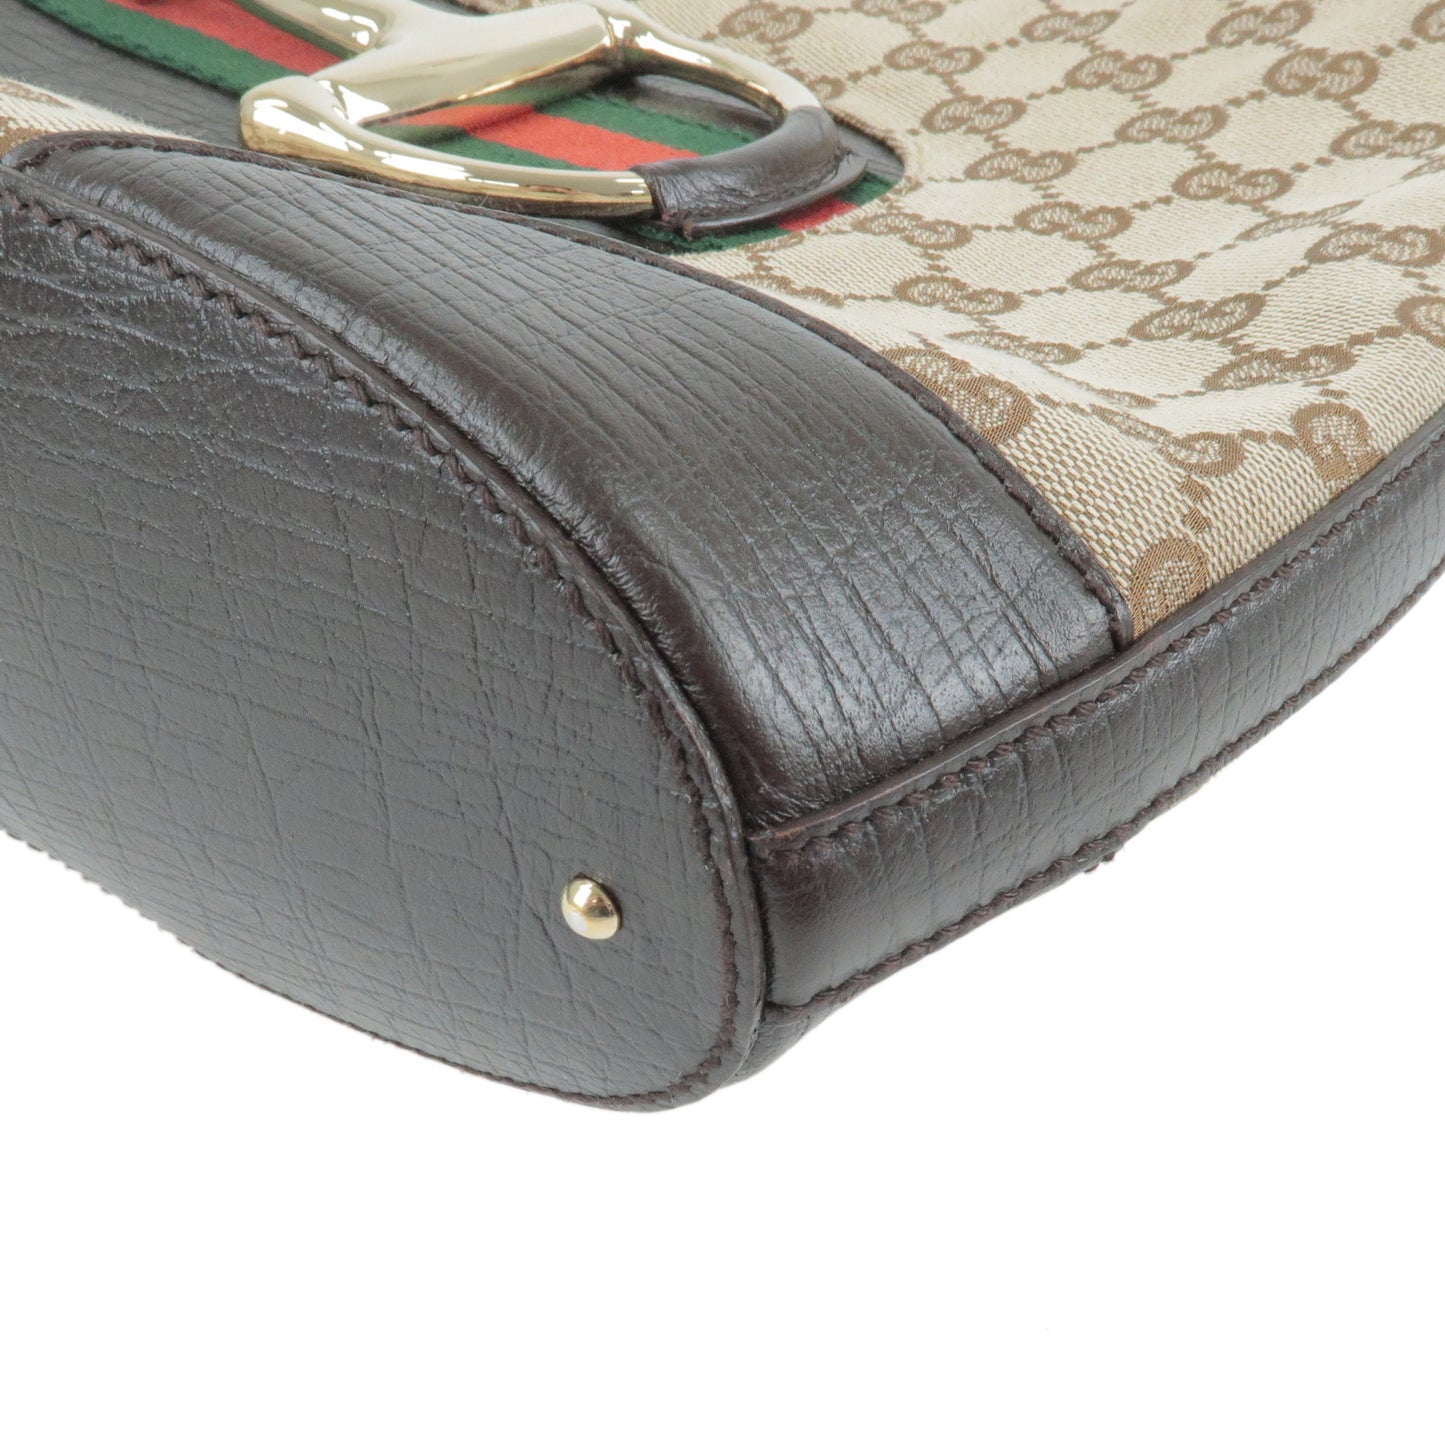 GUCCI-Horsebit-Sherry-GG-Canvas-Leather-Shoulder-Bag-Brown-137386 –  dct-ep_vintage luxury Store